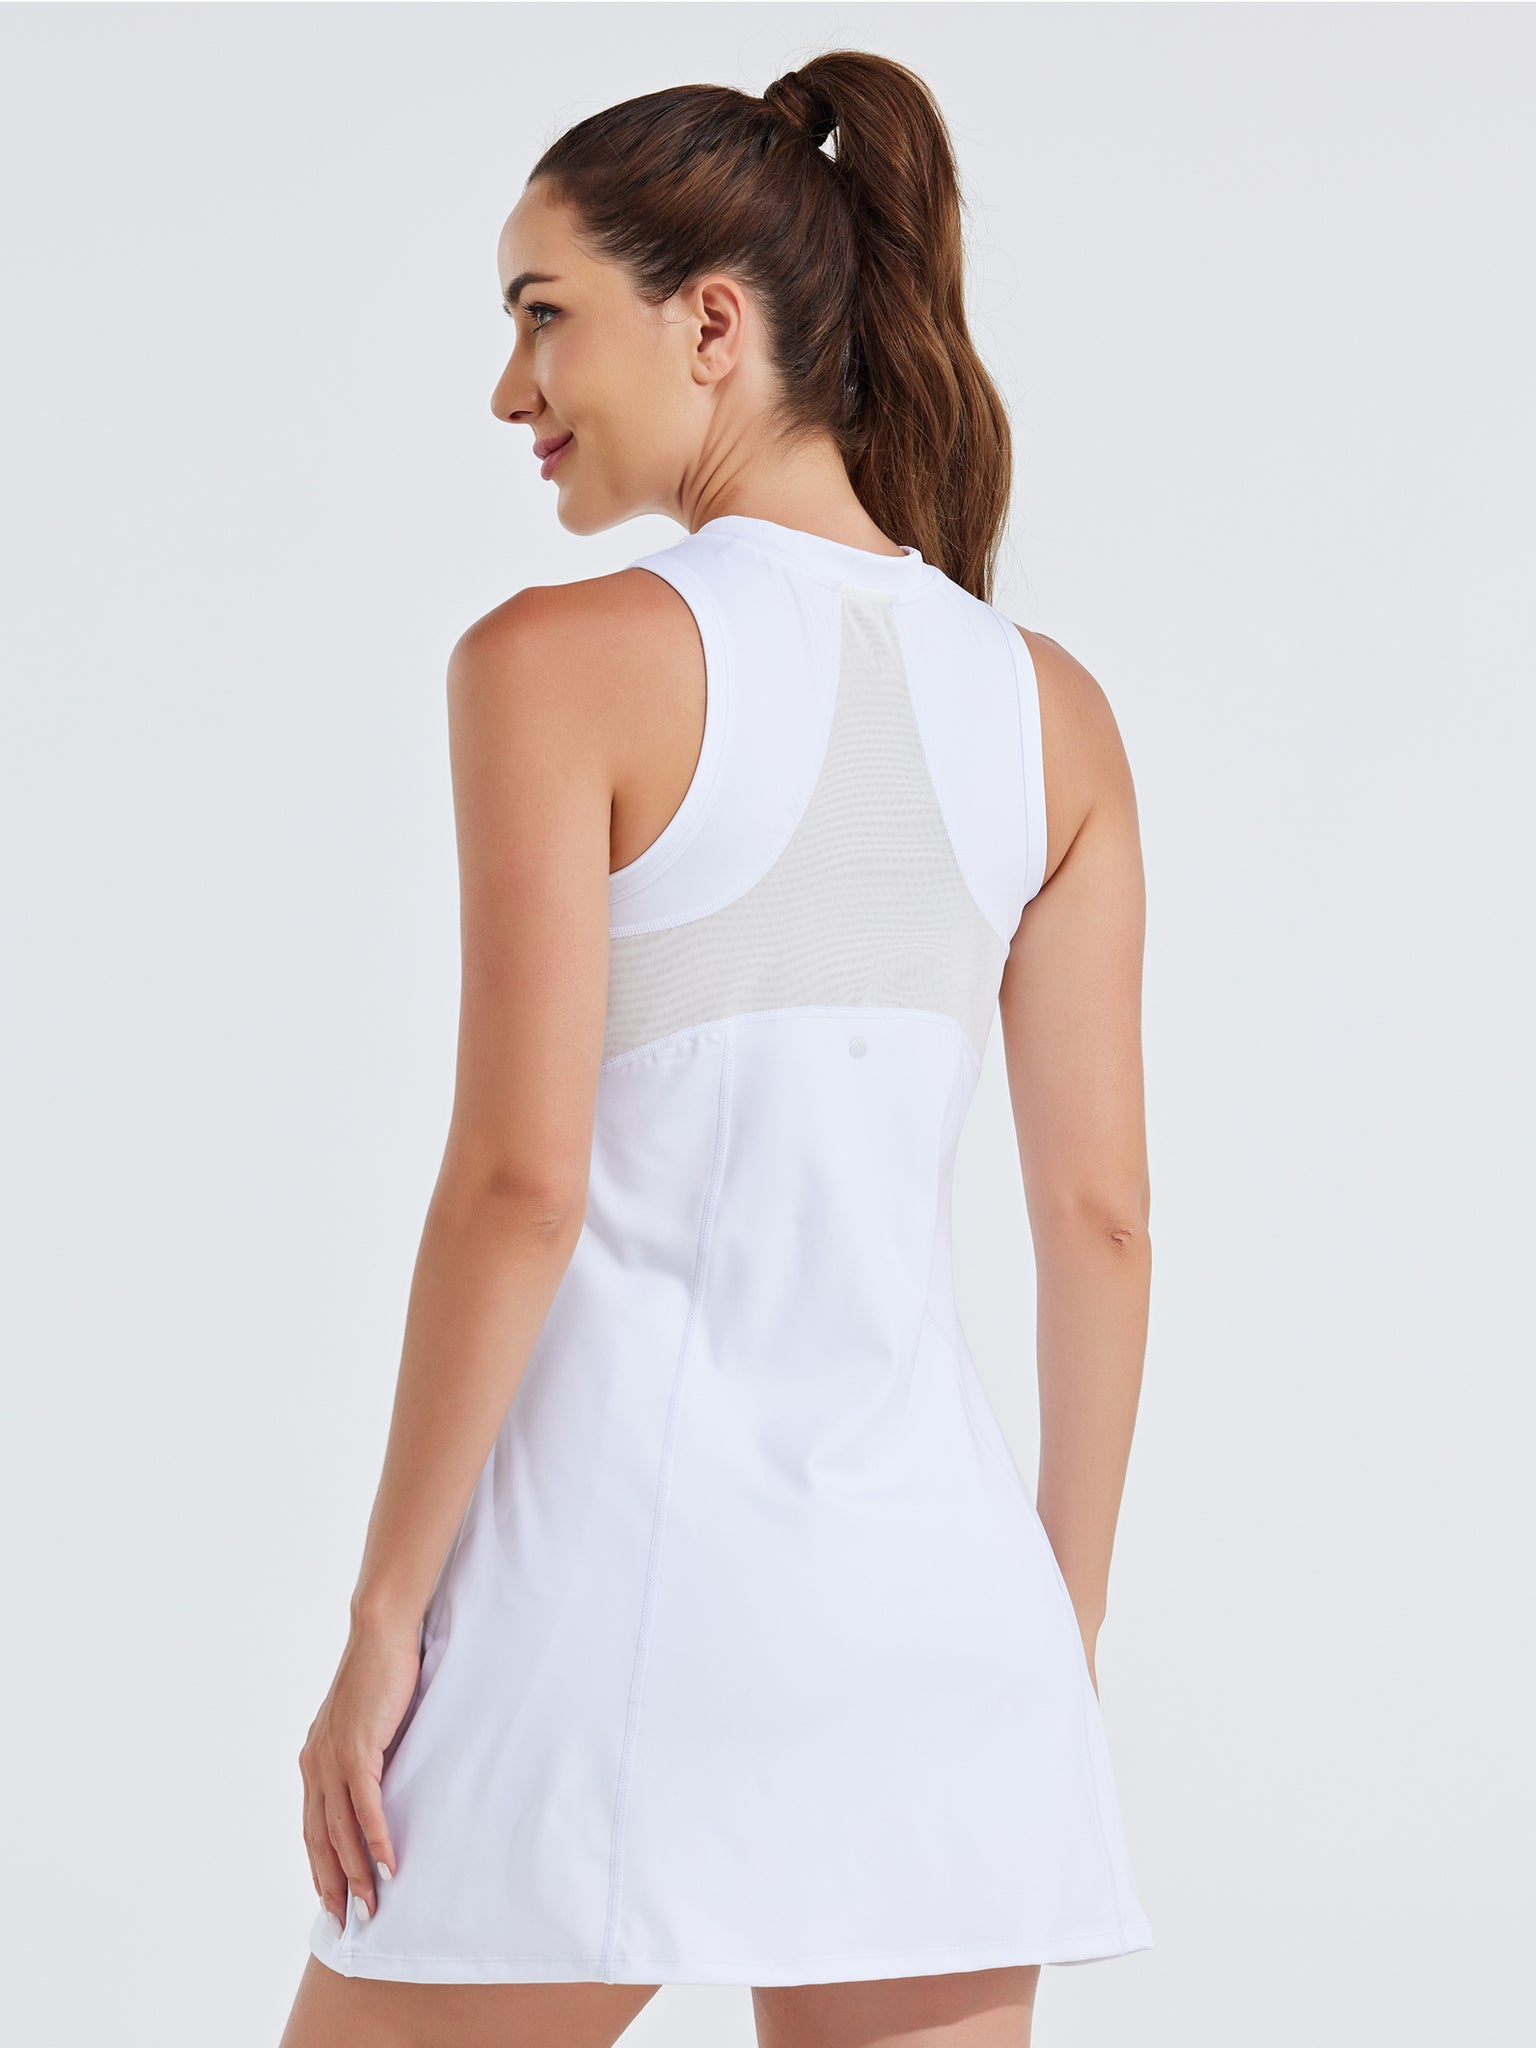 Women's Exercise Dress with Detachable Shorts